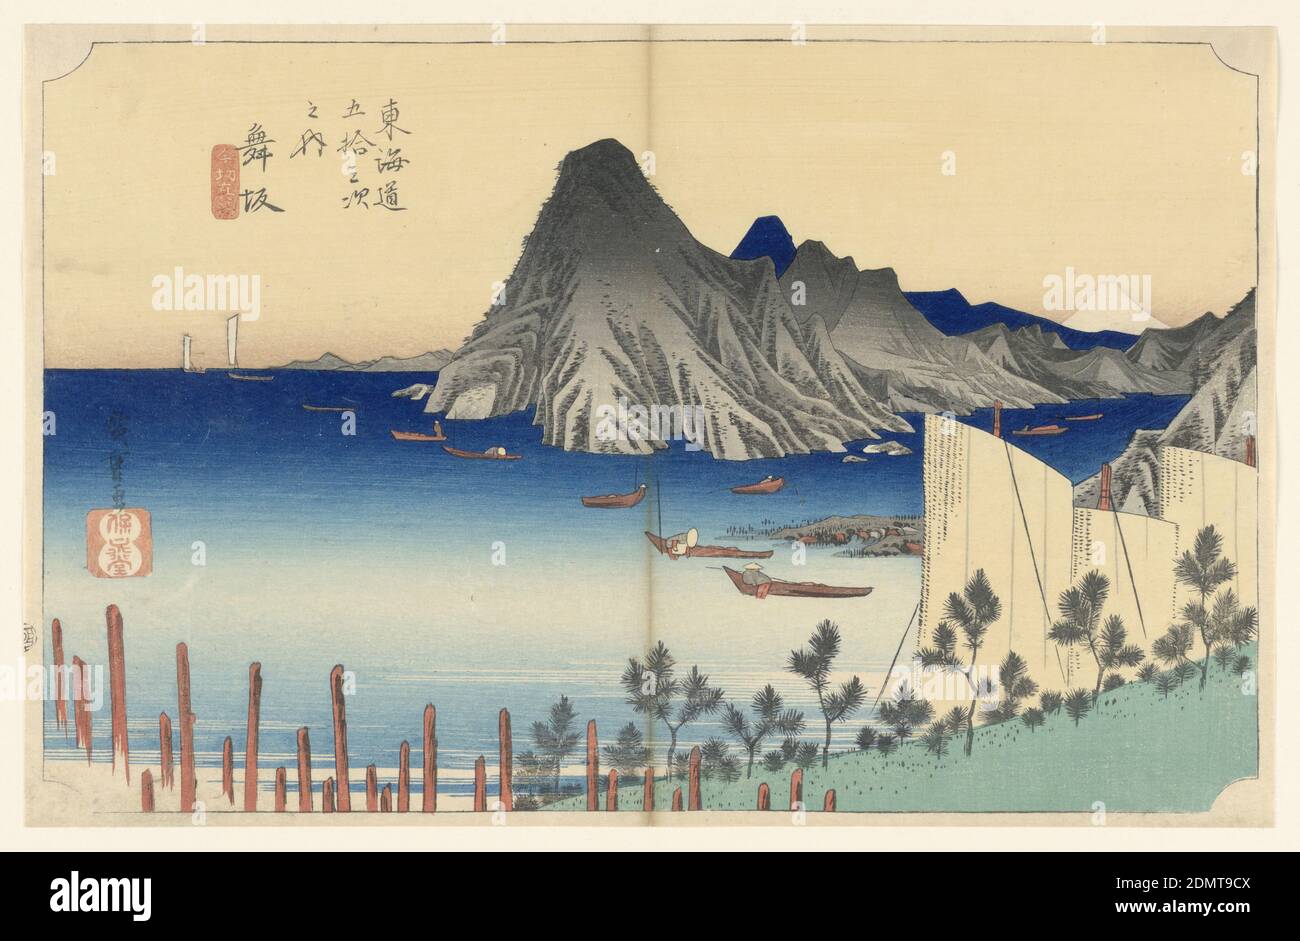 Maisaka, Imaki Point, in The Fifty-Three Stations of the Tokaido Road (Tokaido Gojusan Tsugi-no Uchi), Ando Hiroshige, Japanese, 1797–1858, Woodblock print (ukiyo-e) on mulberry paper (washi), ink with color, Right to center, Imaki Point, a group of rugged peaks, juts out. Right, white peak of Fuji. Around rocky shore are small fishing boats. Lower right, sails of three boats. Lower left, stakes., Japan, ca. 1834, seascapes, Print Stock Photo